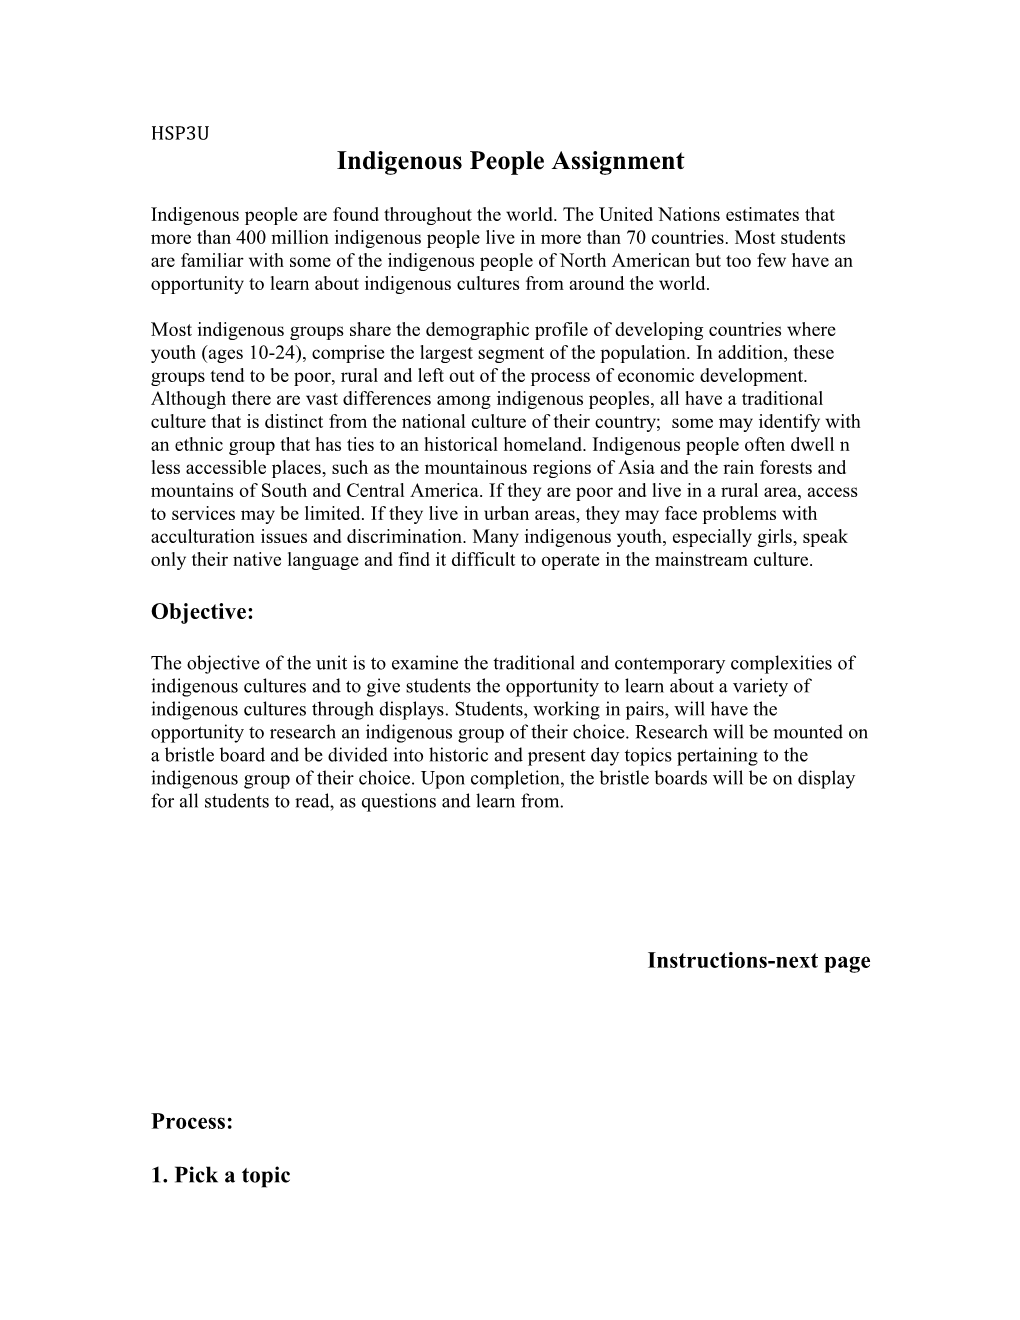 Indigenous People Assignment